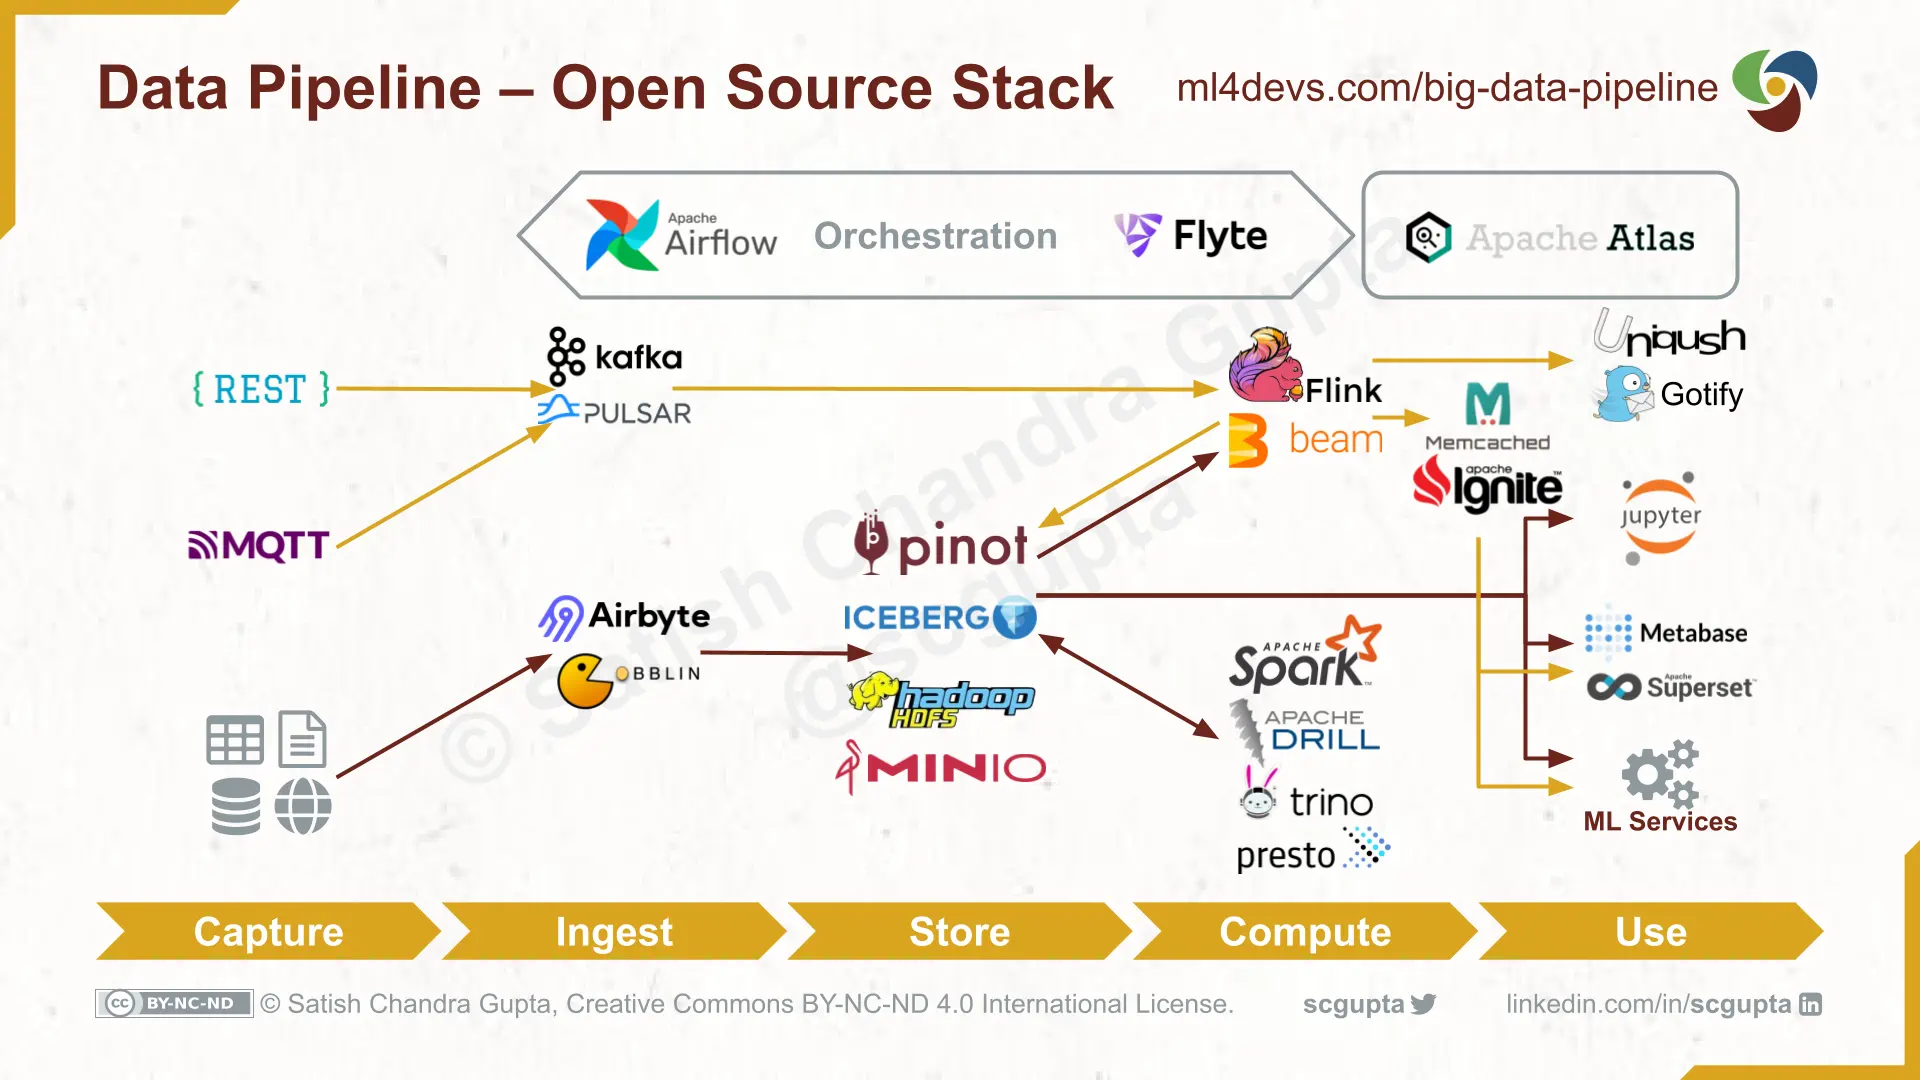 Big data architecture on cloud using open source technologies